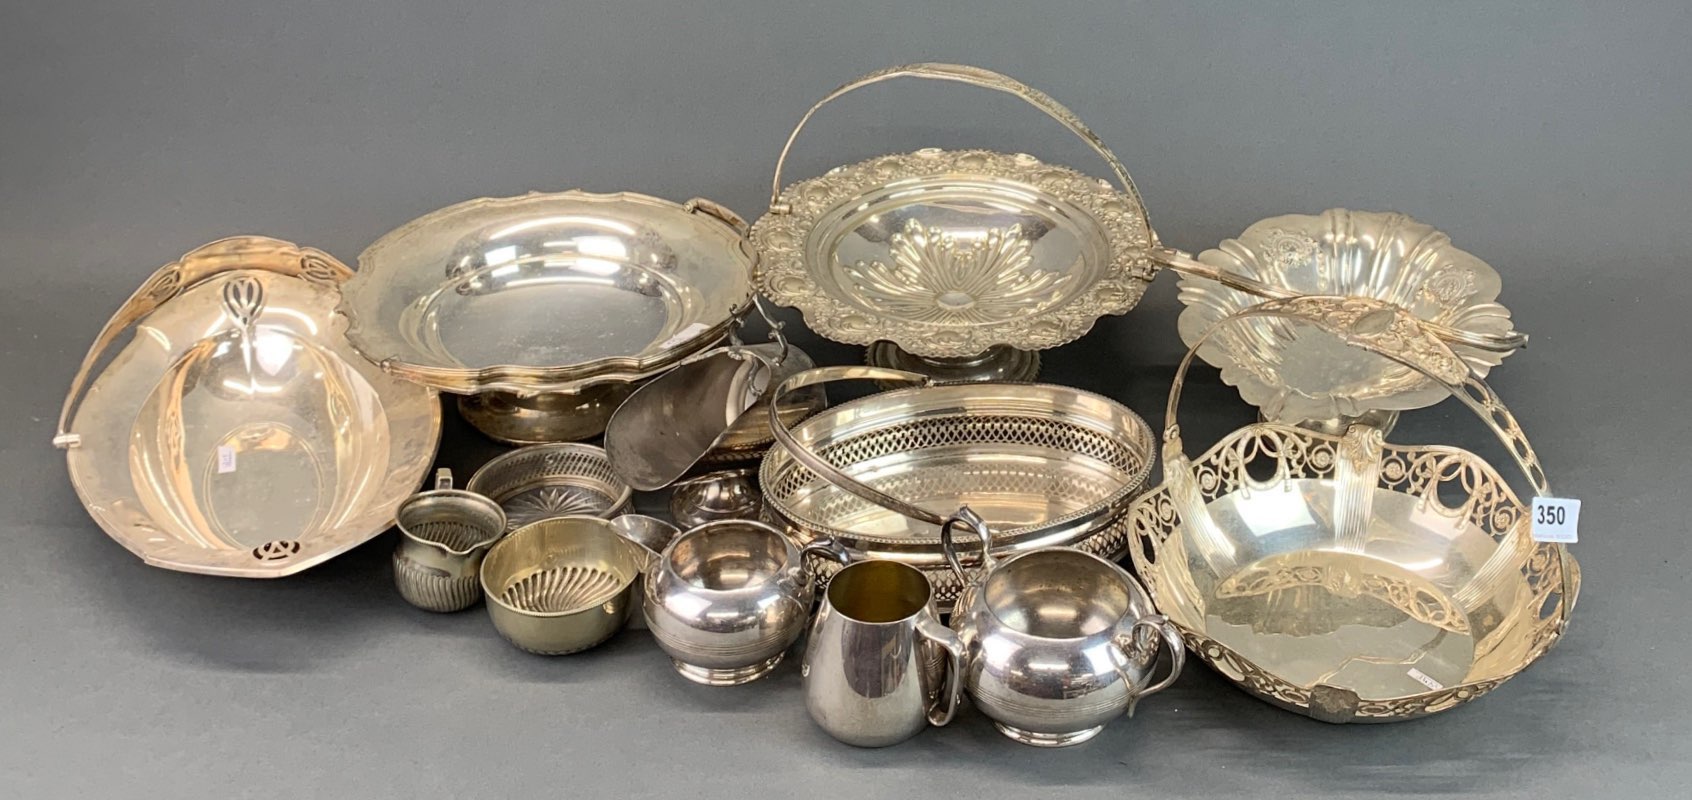 A quantity of good silver plate, including two WMF baskets.